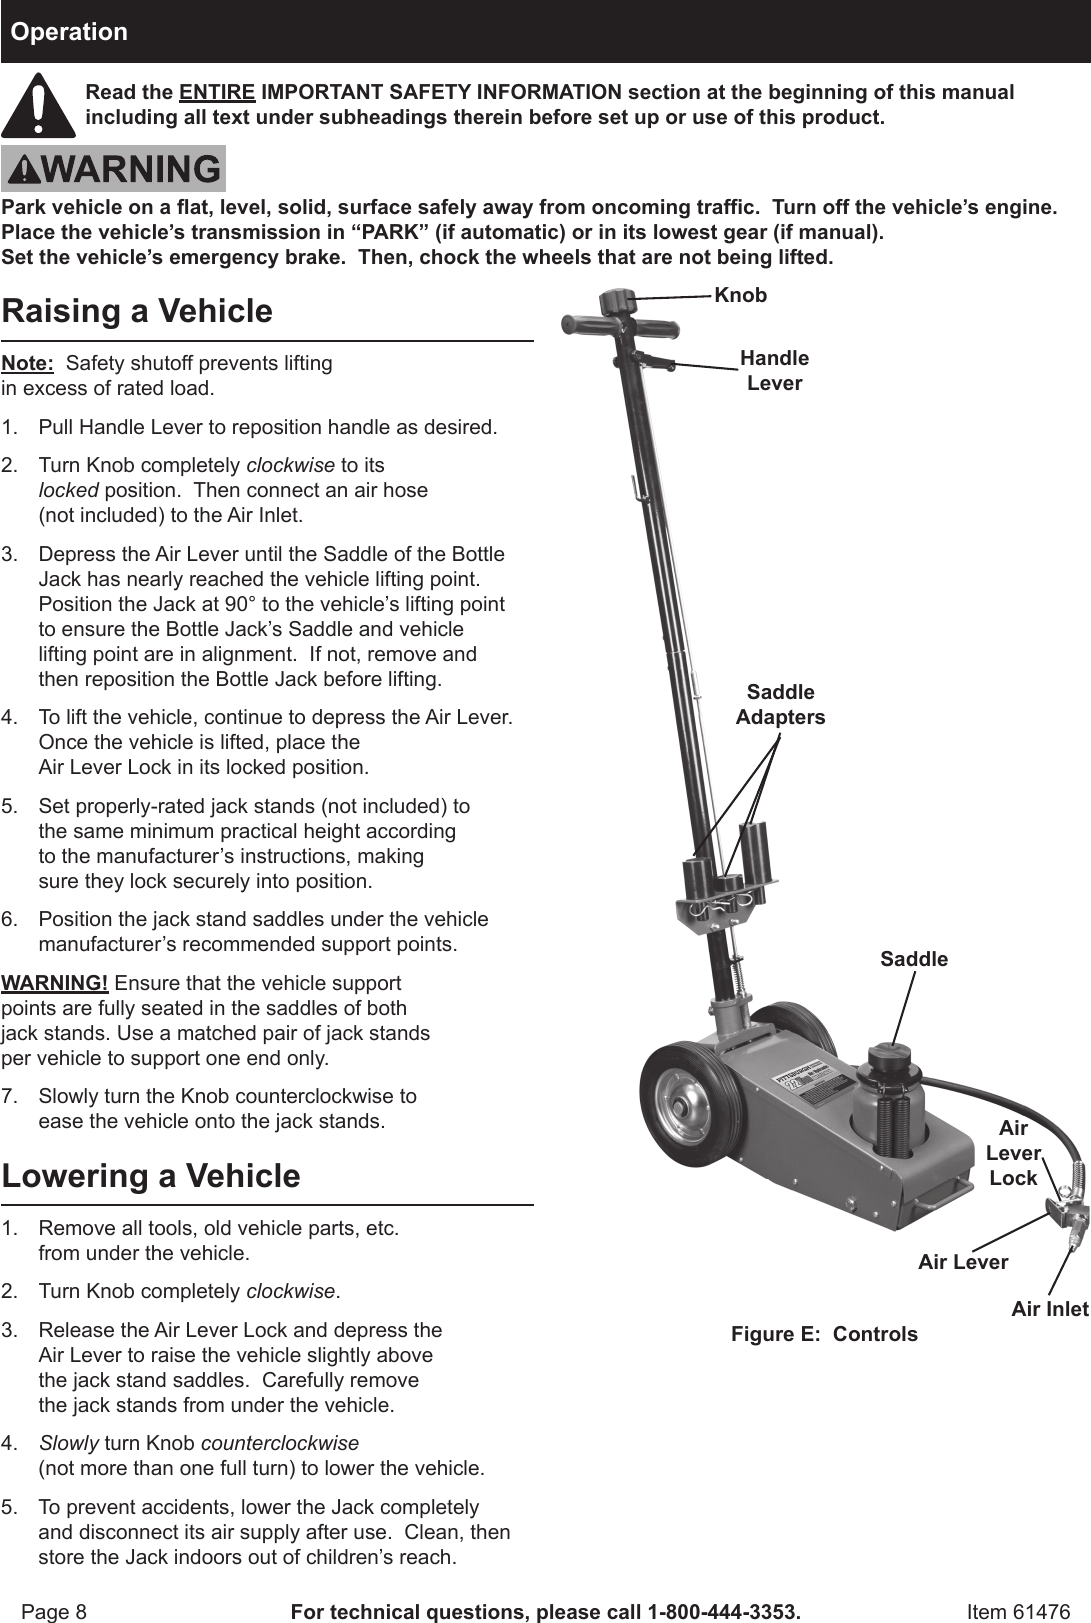 Page 8 of 12 - Harbor-Freight Harbor-Freight-22-Ton-Air-Hydraulic-Floor-Jack-Product-Manual-  Harbor-freight-22-ton-air-hydraulic-floor-jack-product-manual